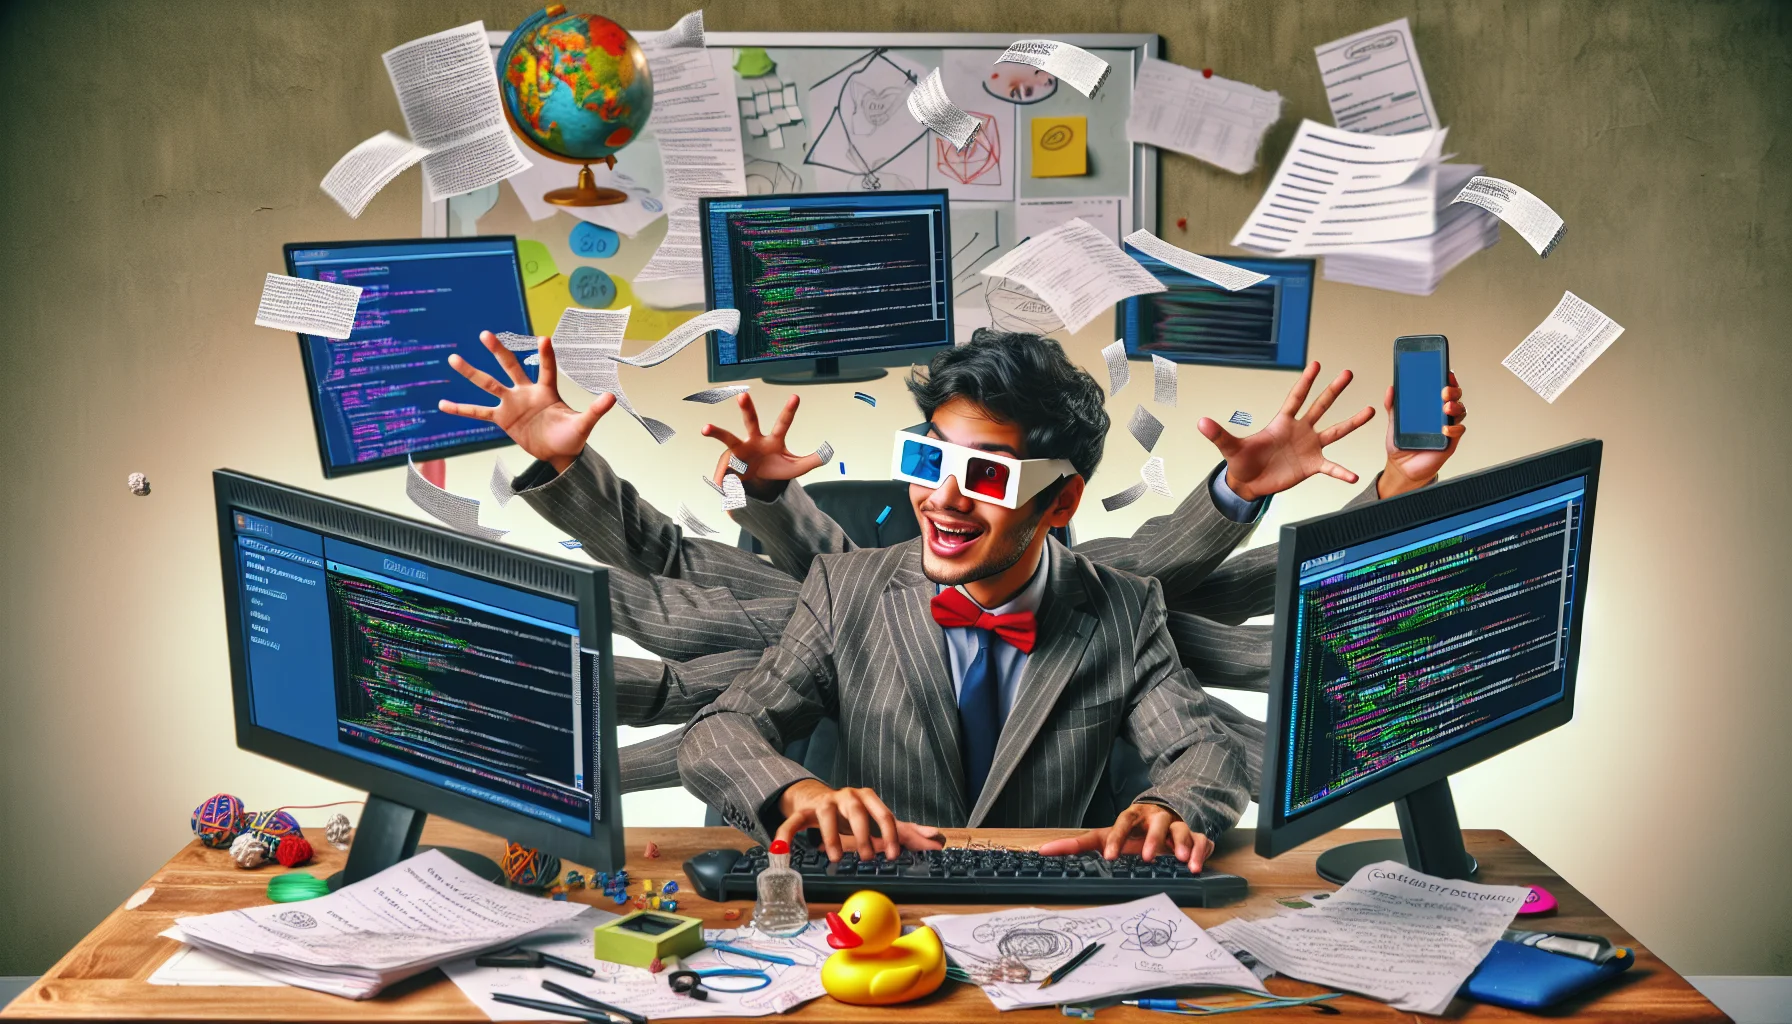 Create a humorous image which underscores the theme of web hosting. Display a generic website building software in a funny setup: The software is personified as an affable, young South Asian man wearing 3D glasses and working on multiple computer screens. Codes are flying around him in a chaotic manner, it seems like he's defying gravity. The scene should be in an overtly large workspace filled with odd objects like rubber duckies, a spinning globe, papers with scribbled doodles. The image should feel both charming and enticing for prospective clients who'd want web hosting.